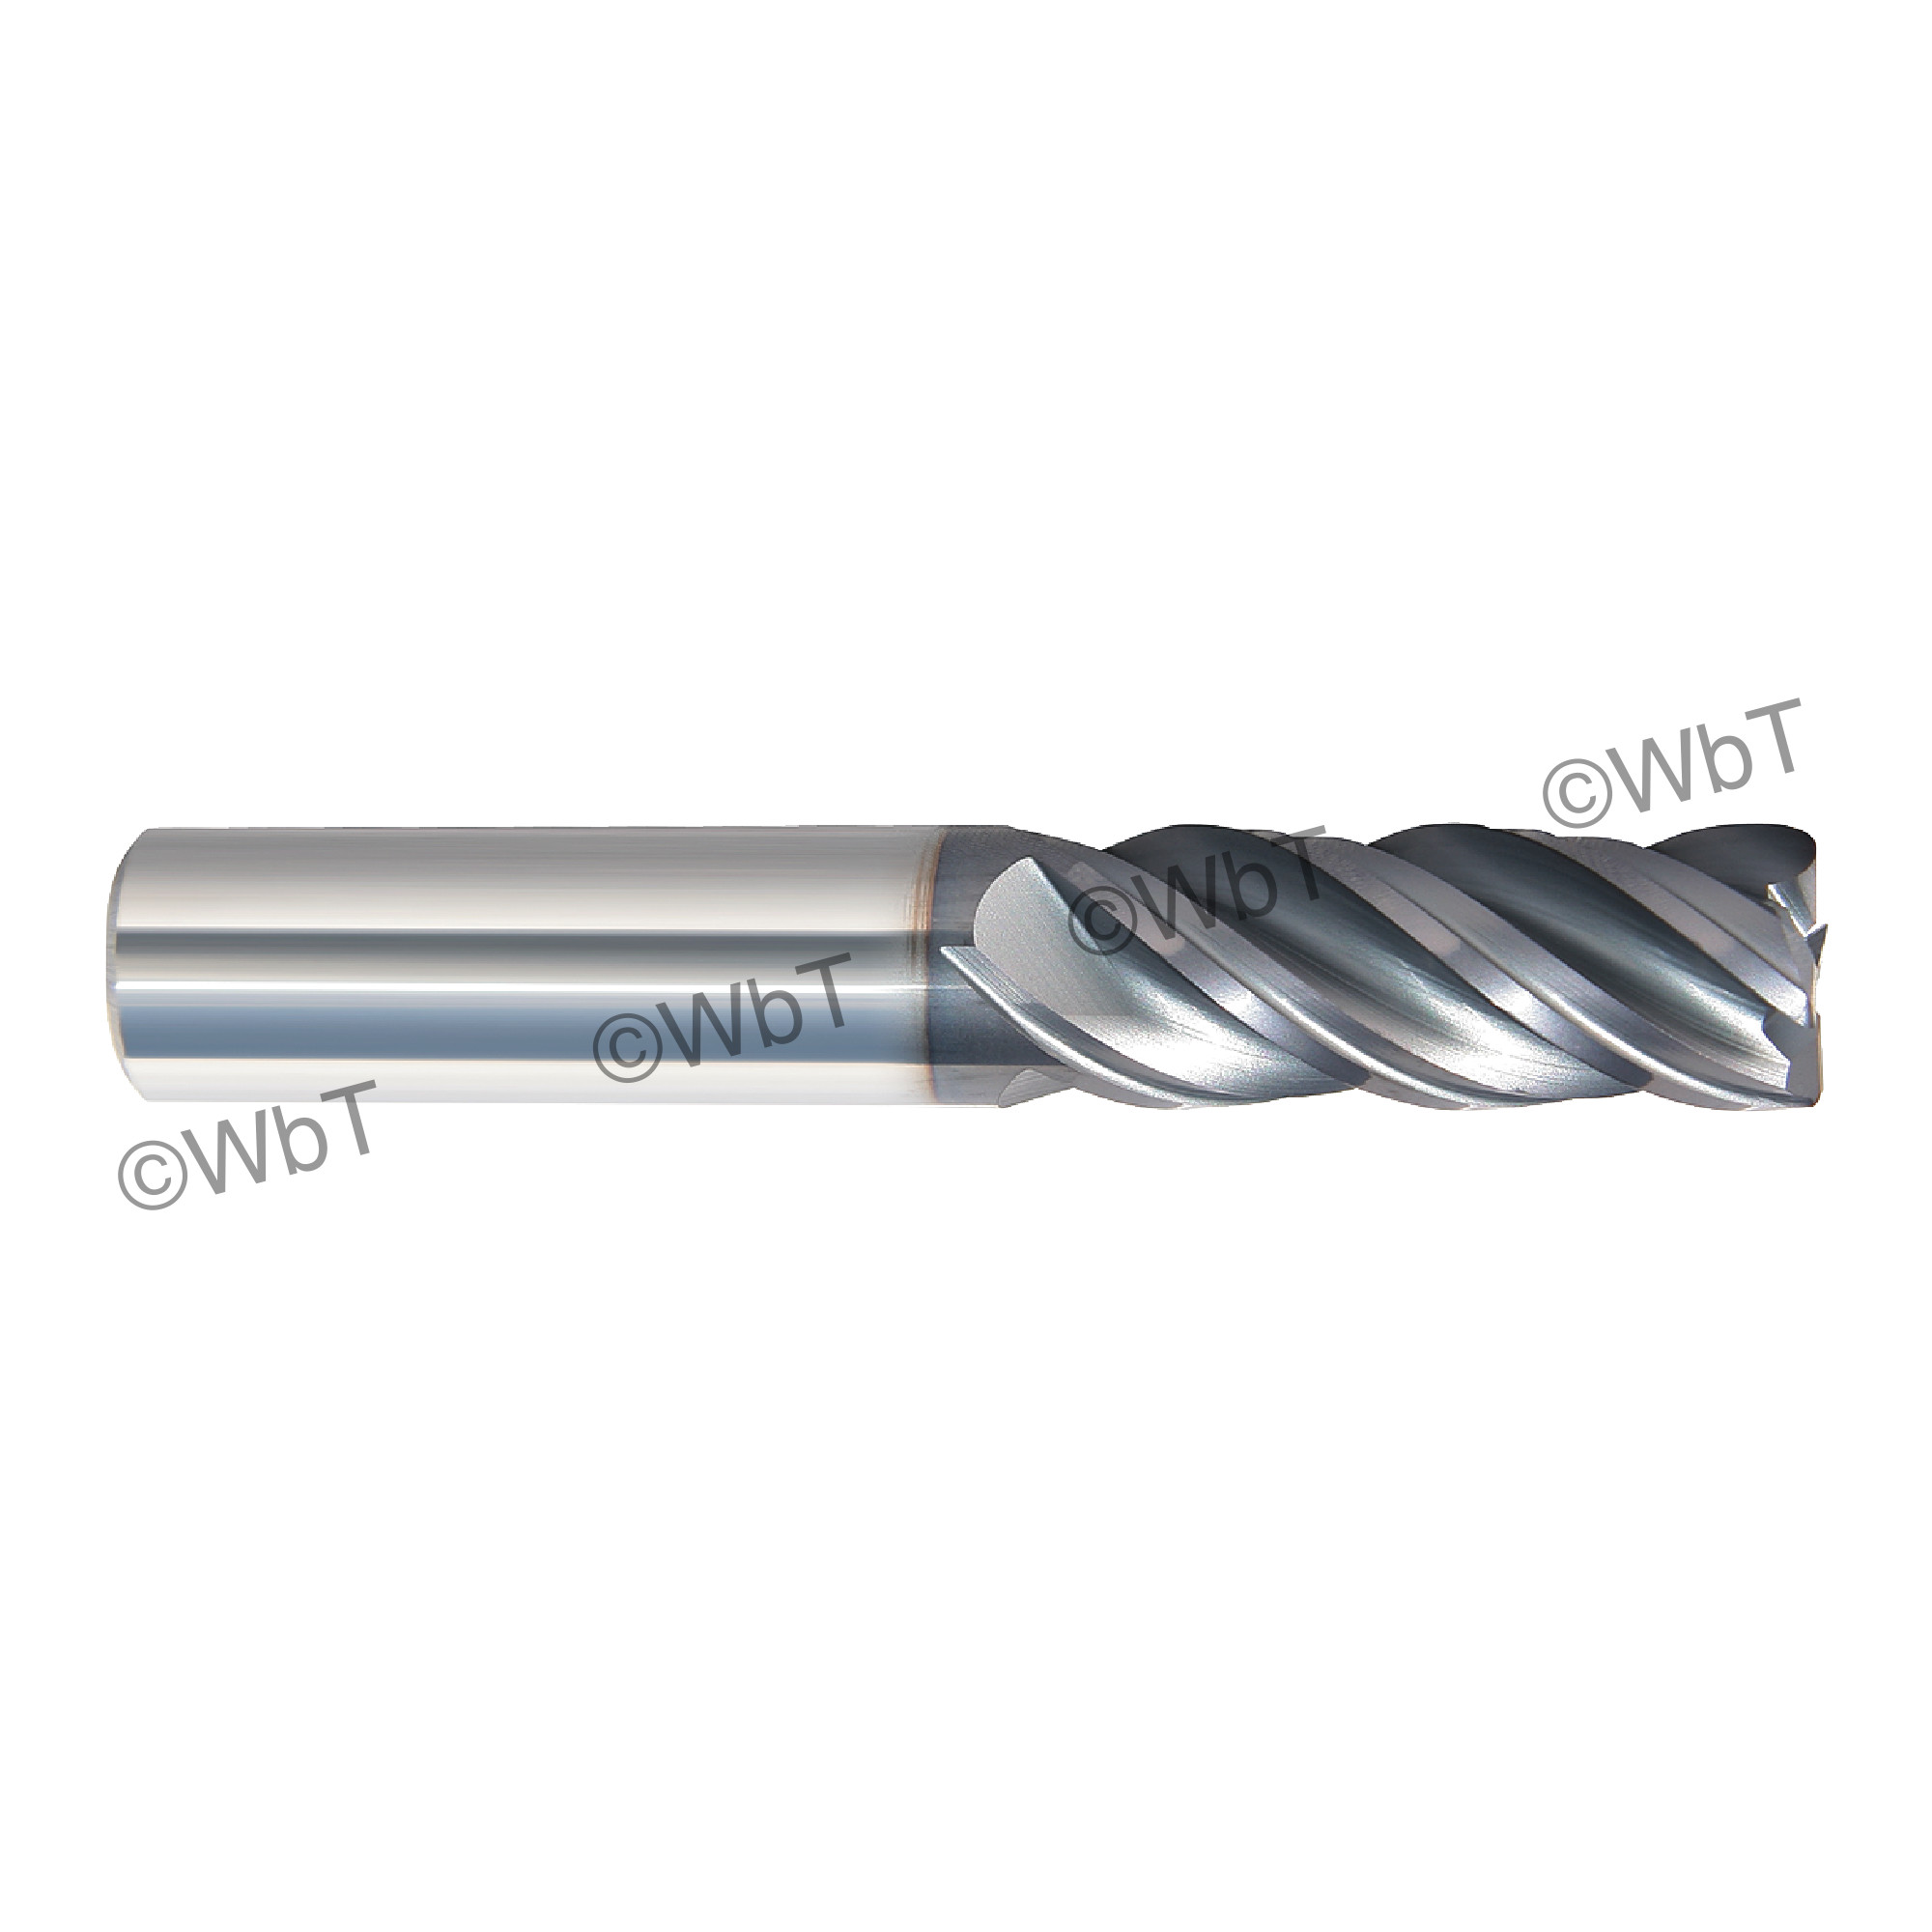 Rushmore USA 1/8" x 1/4" Flute Solid Carbide Variable Helix Unequal Index AlTiN Coated Corner Radius 4 Flute Roughing & 